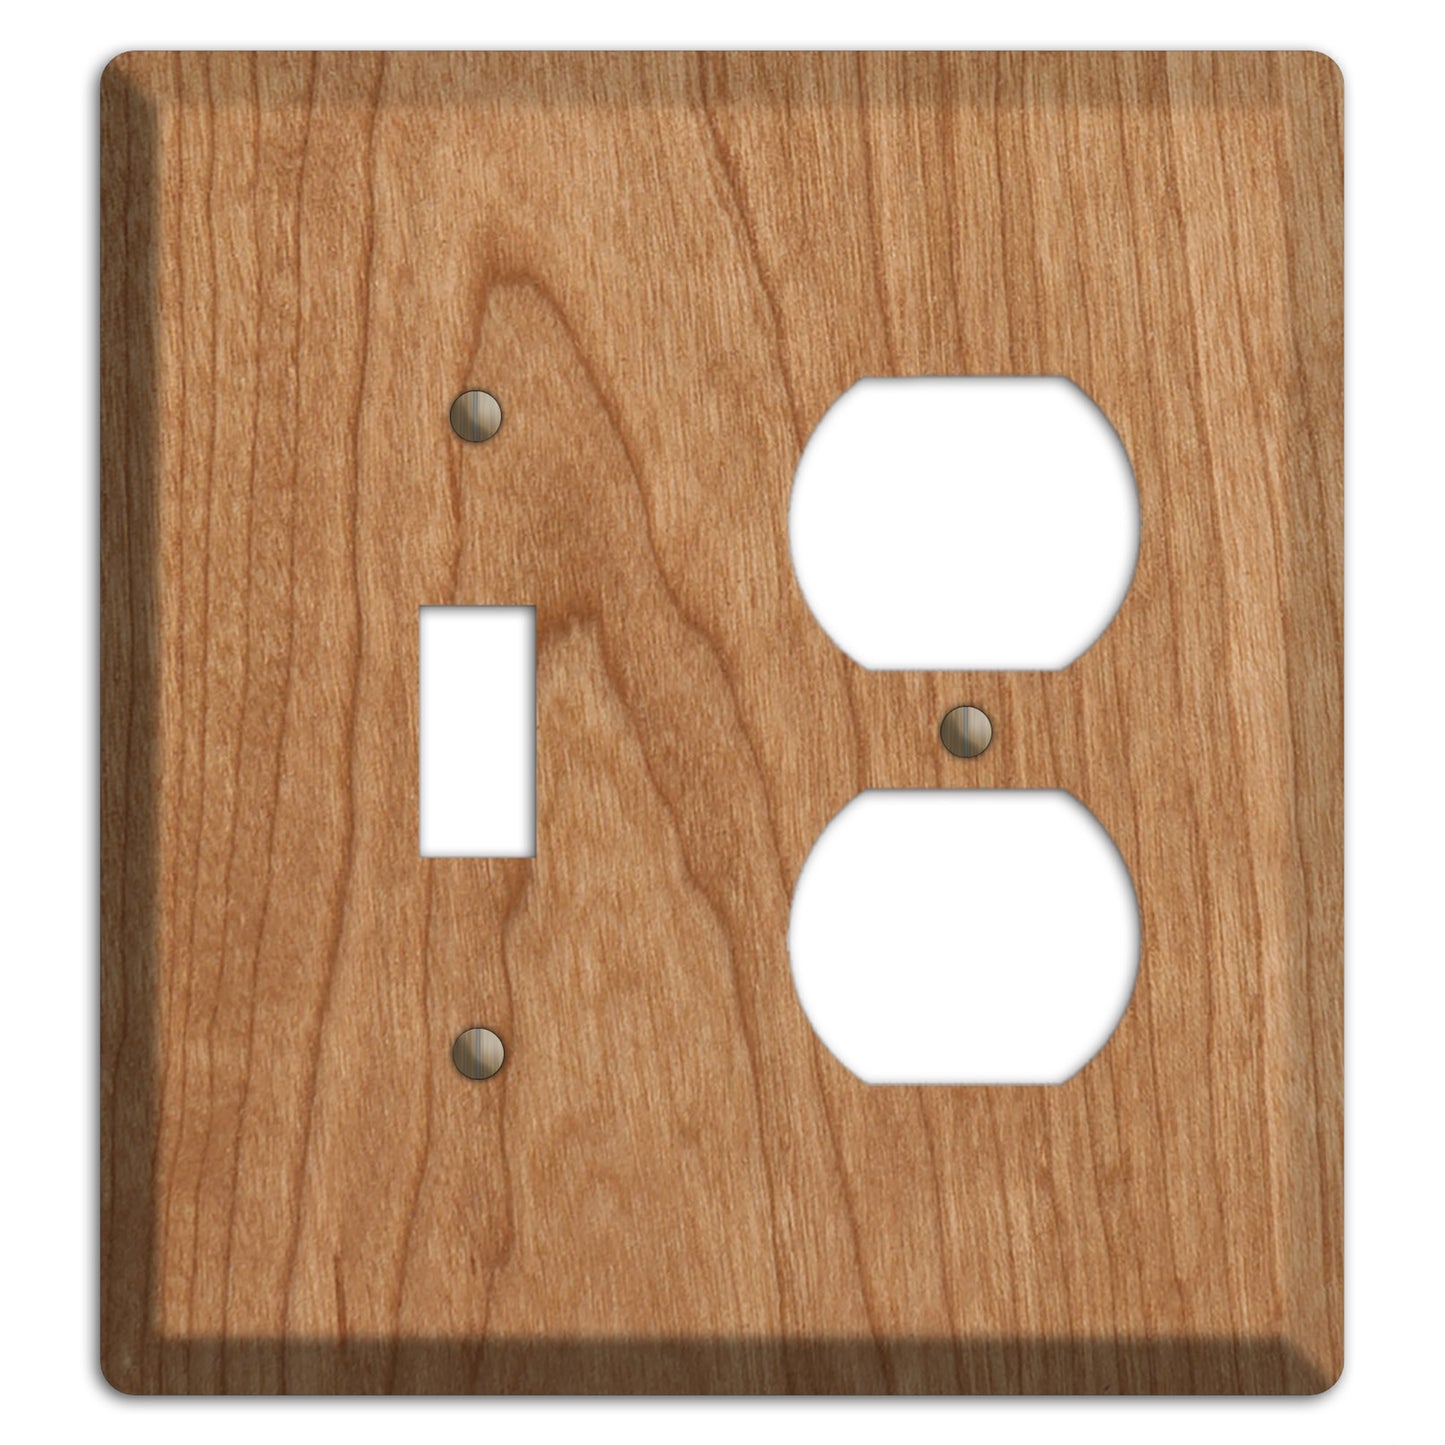 Unfinished Cherry Wood Toggle / Duplex Outlet Cover Plate